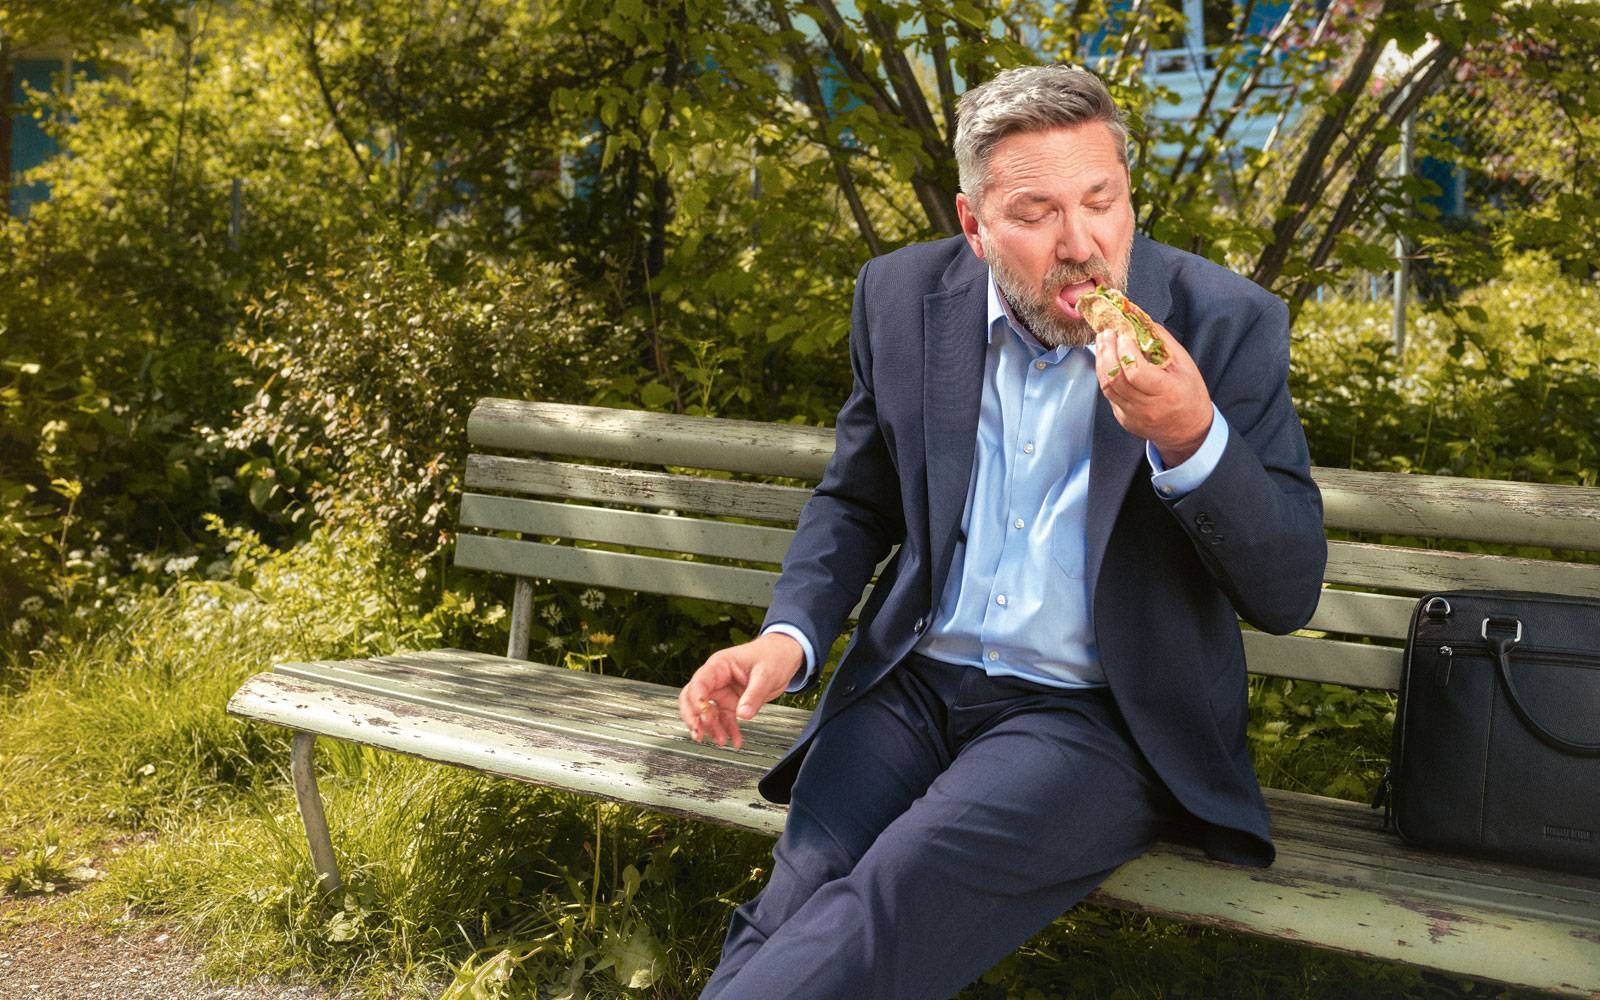 Man sitting on bench in park eating